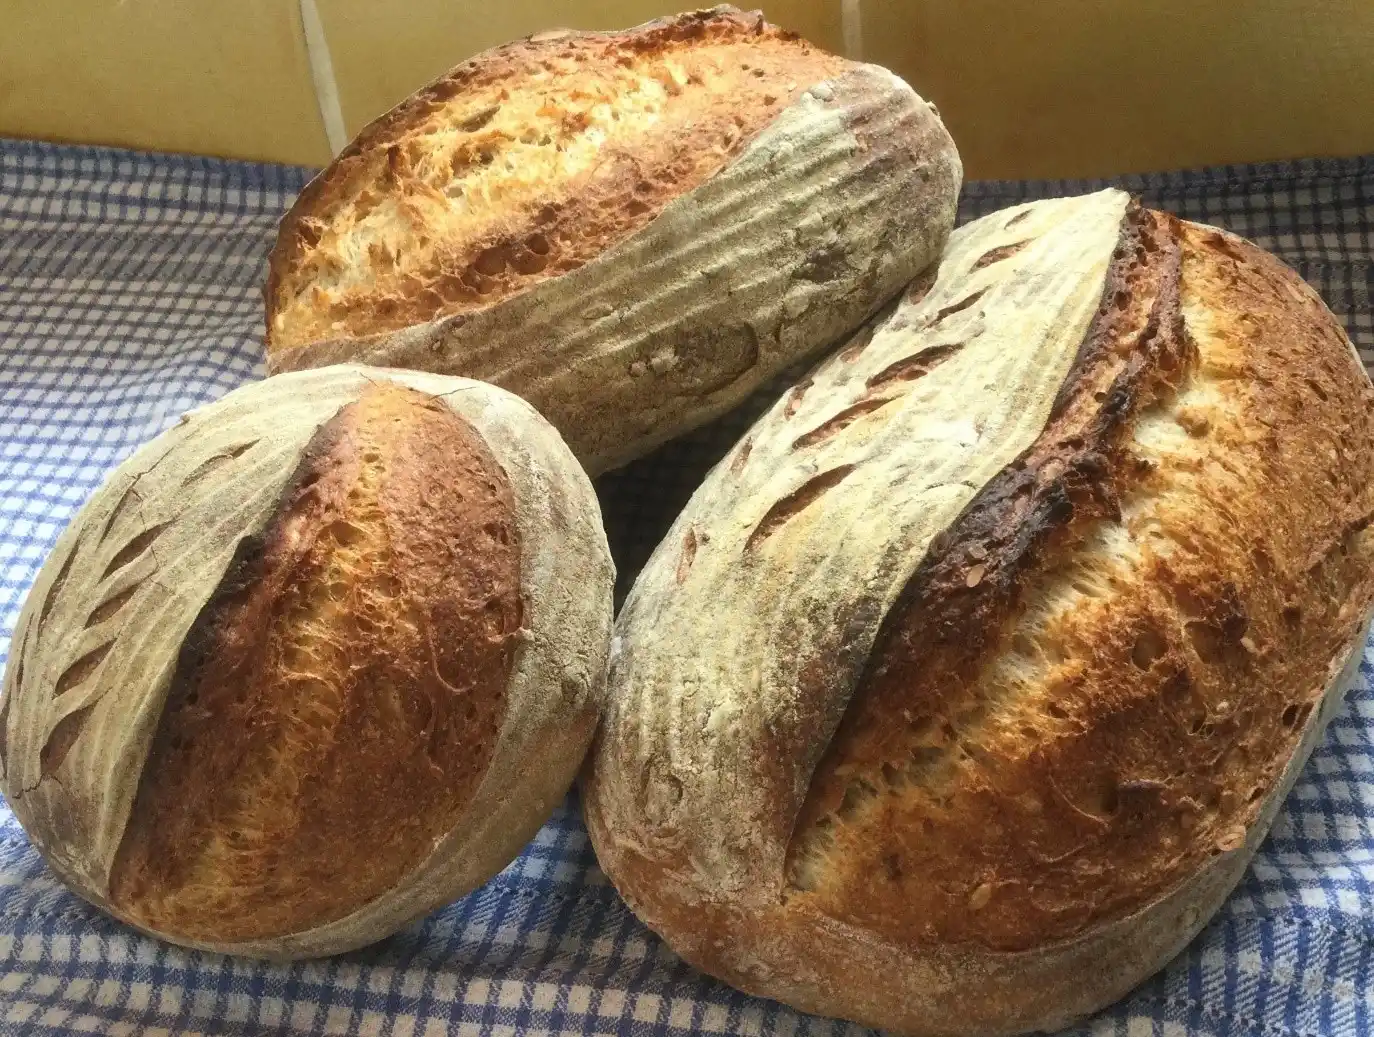 Three loaves of sourdough